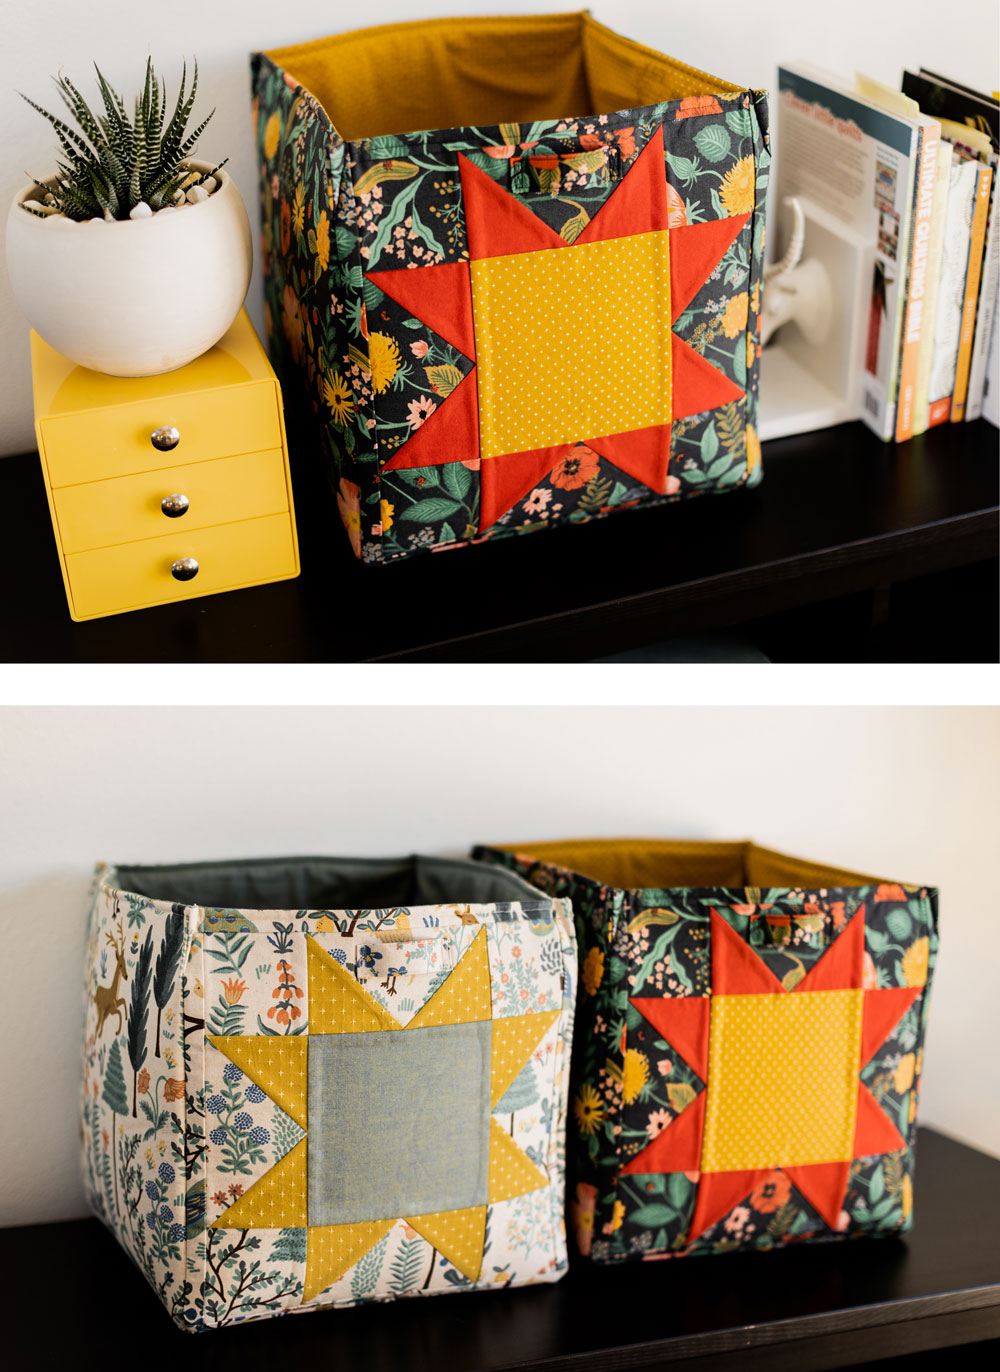 This beginner-friendly patchwork storage cube tutorial explains how to sew a storage bin featuring the classic sawtooth star block. suzyquilts.com #sewingtutorial #sew